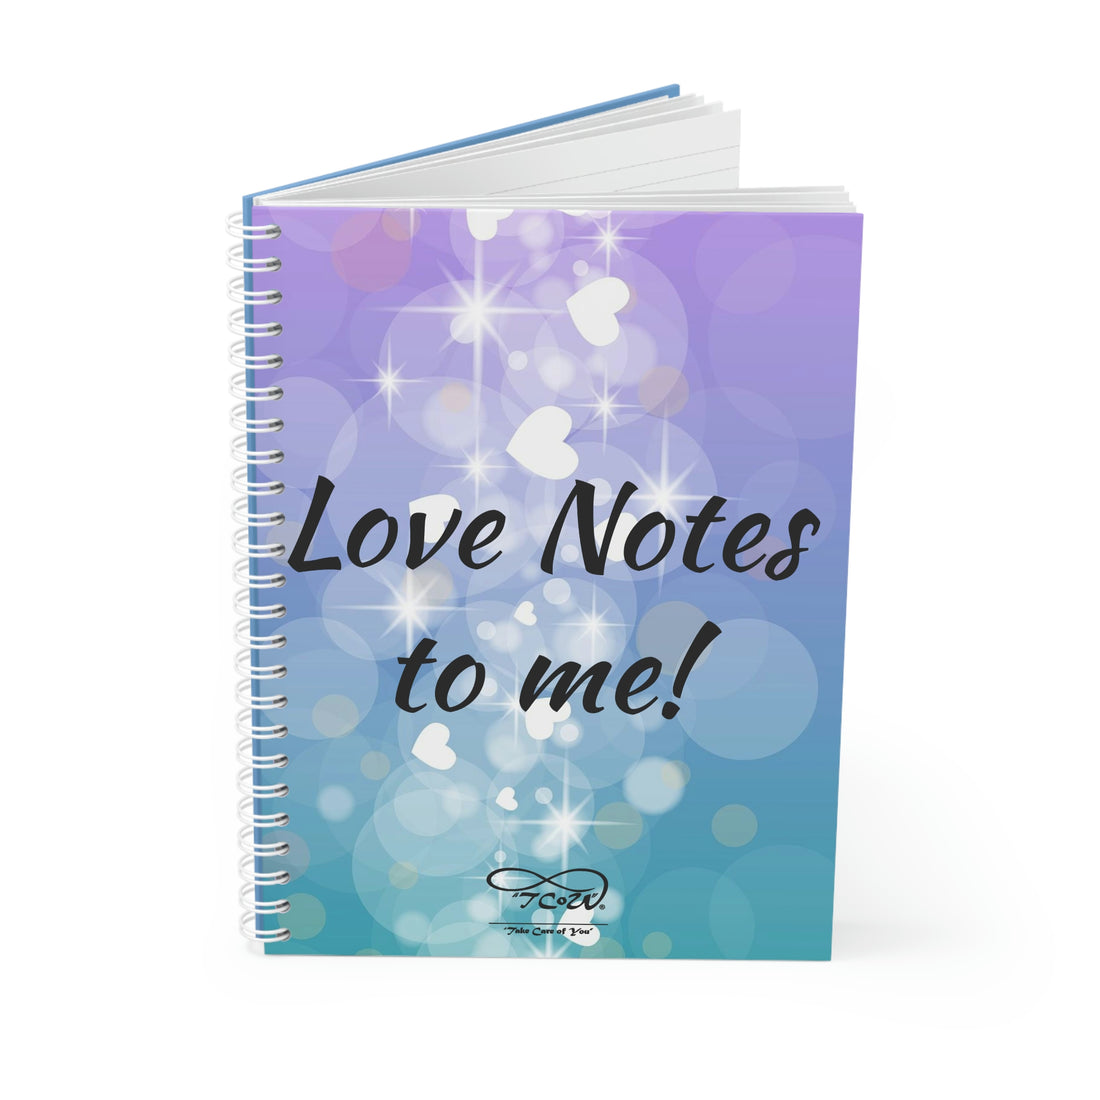 Love Notes to Me!! Notebook